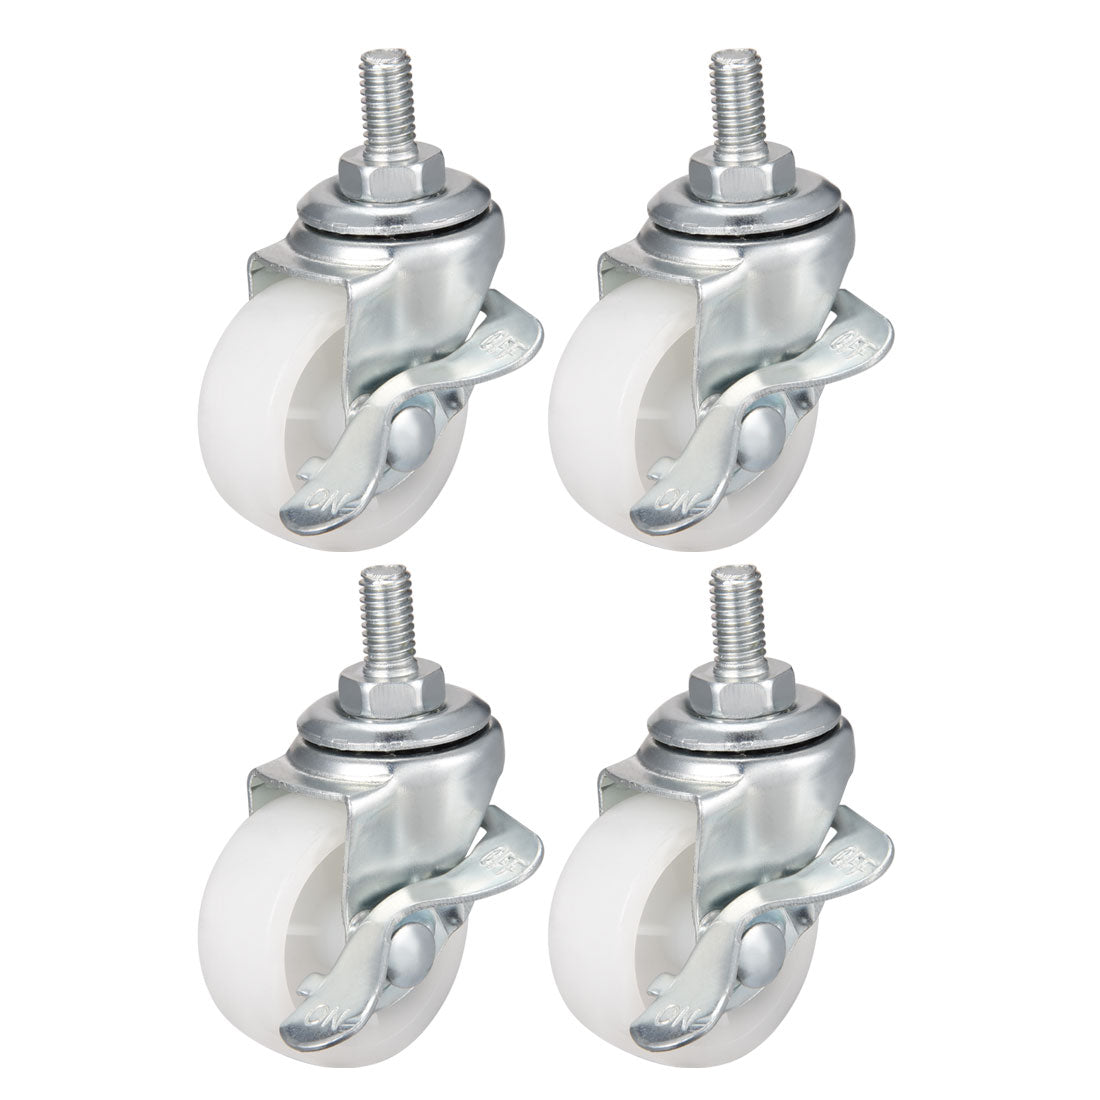 uxcell Uxcell 1.5 Inch Swivel Caster Wheels PP 360 Degree Threaded Stem Caster Wheel with Brake M8 x 15mm 33lb Capacity 4 Pcs